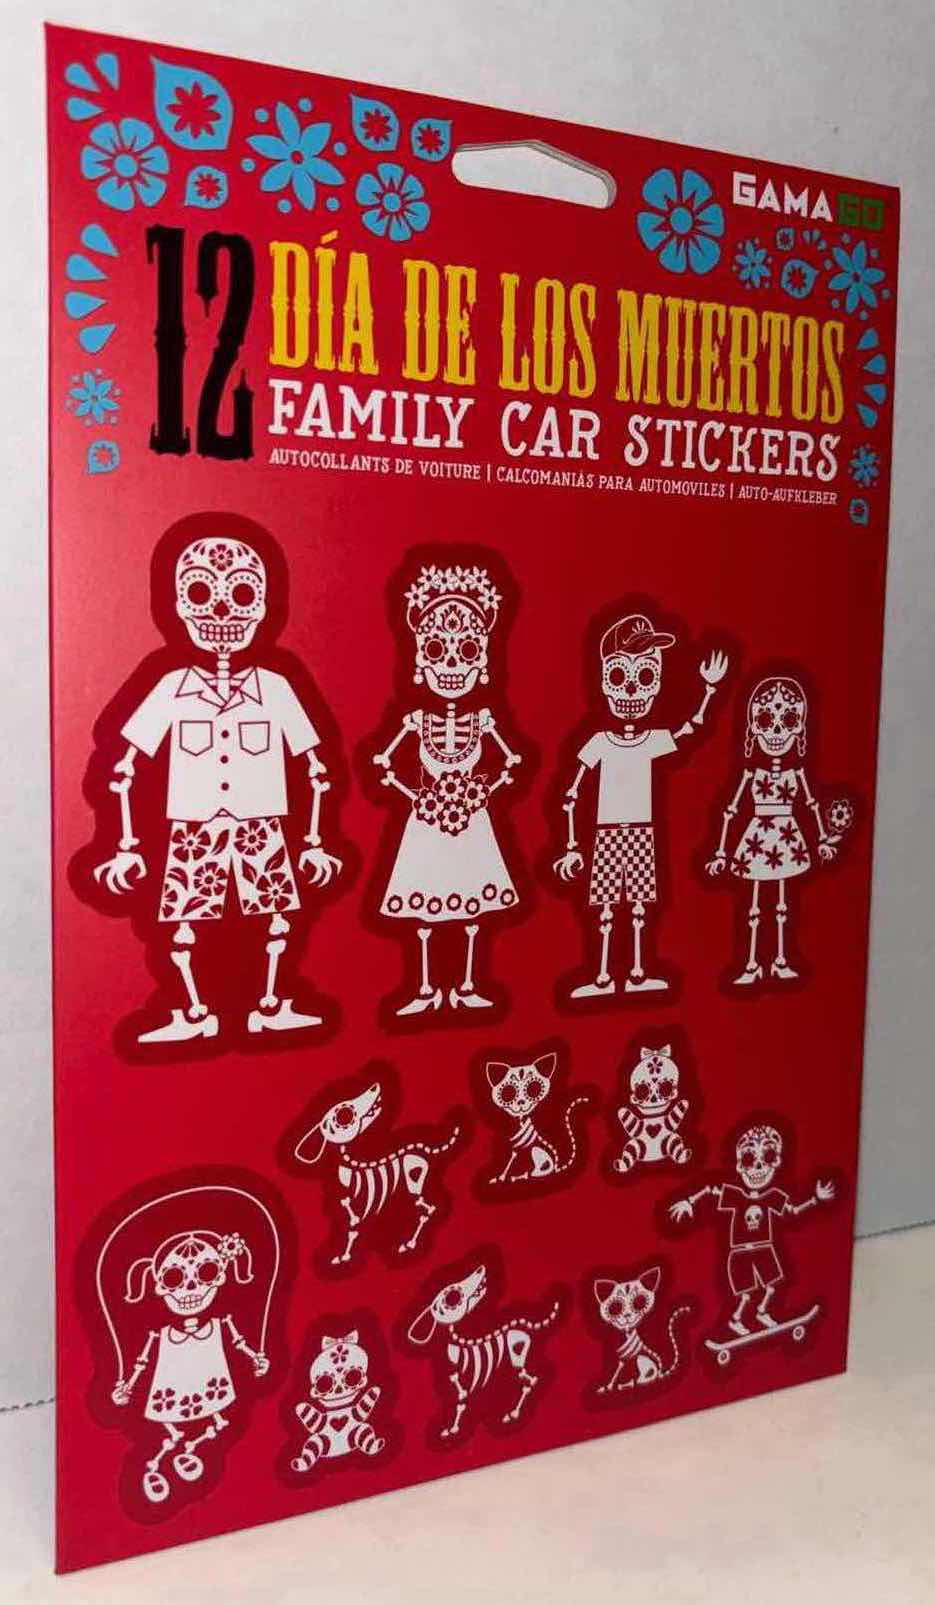 Photo 2 of NEW 5-PACK GAMA GO 12 DÍA DE LOS MUERTOS FAMILY CAR STICKERS PACK